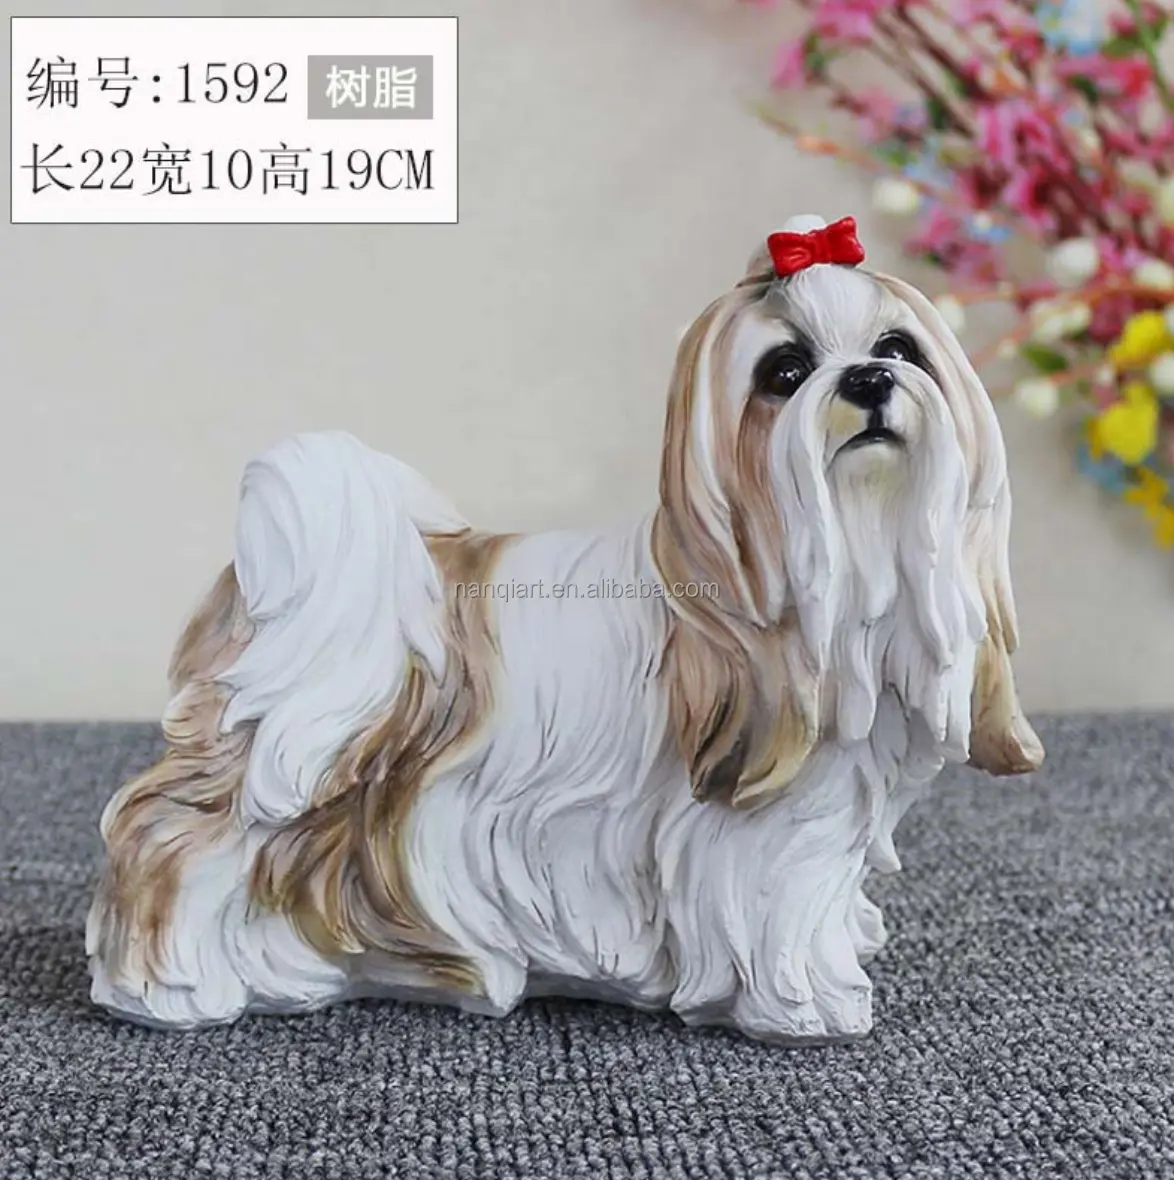 Cheap Wholesale Home Decoration Ornament Artificial Handicrafts Resin Small Cartoon Cute Animal Models White Pet Dogs Statues